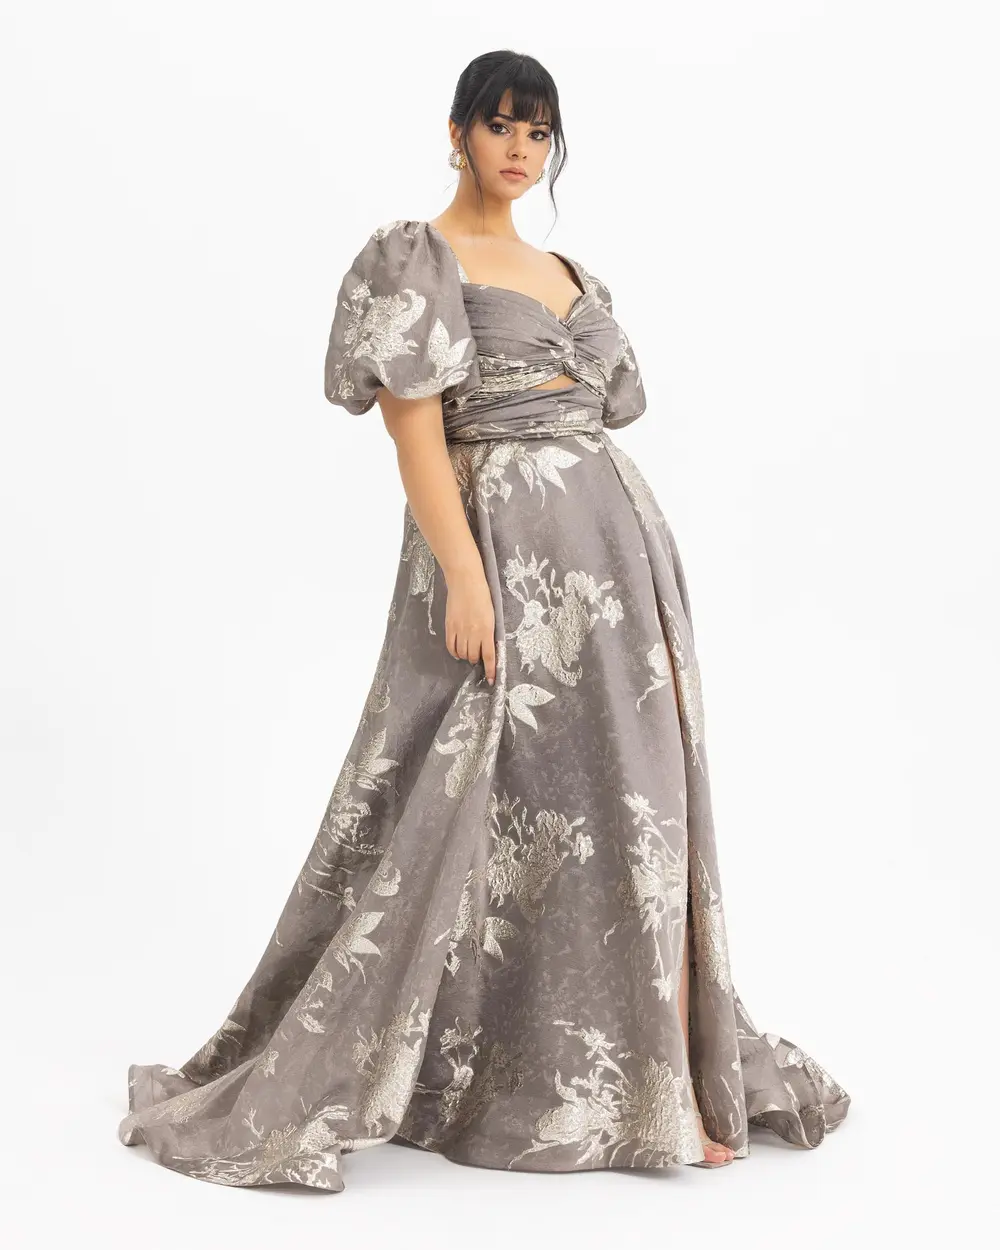  PLUS SIZE BALLOON SLEEVE PATTERNED EVENING DRESS